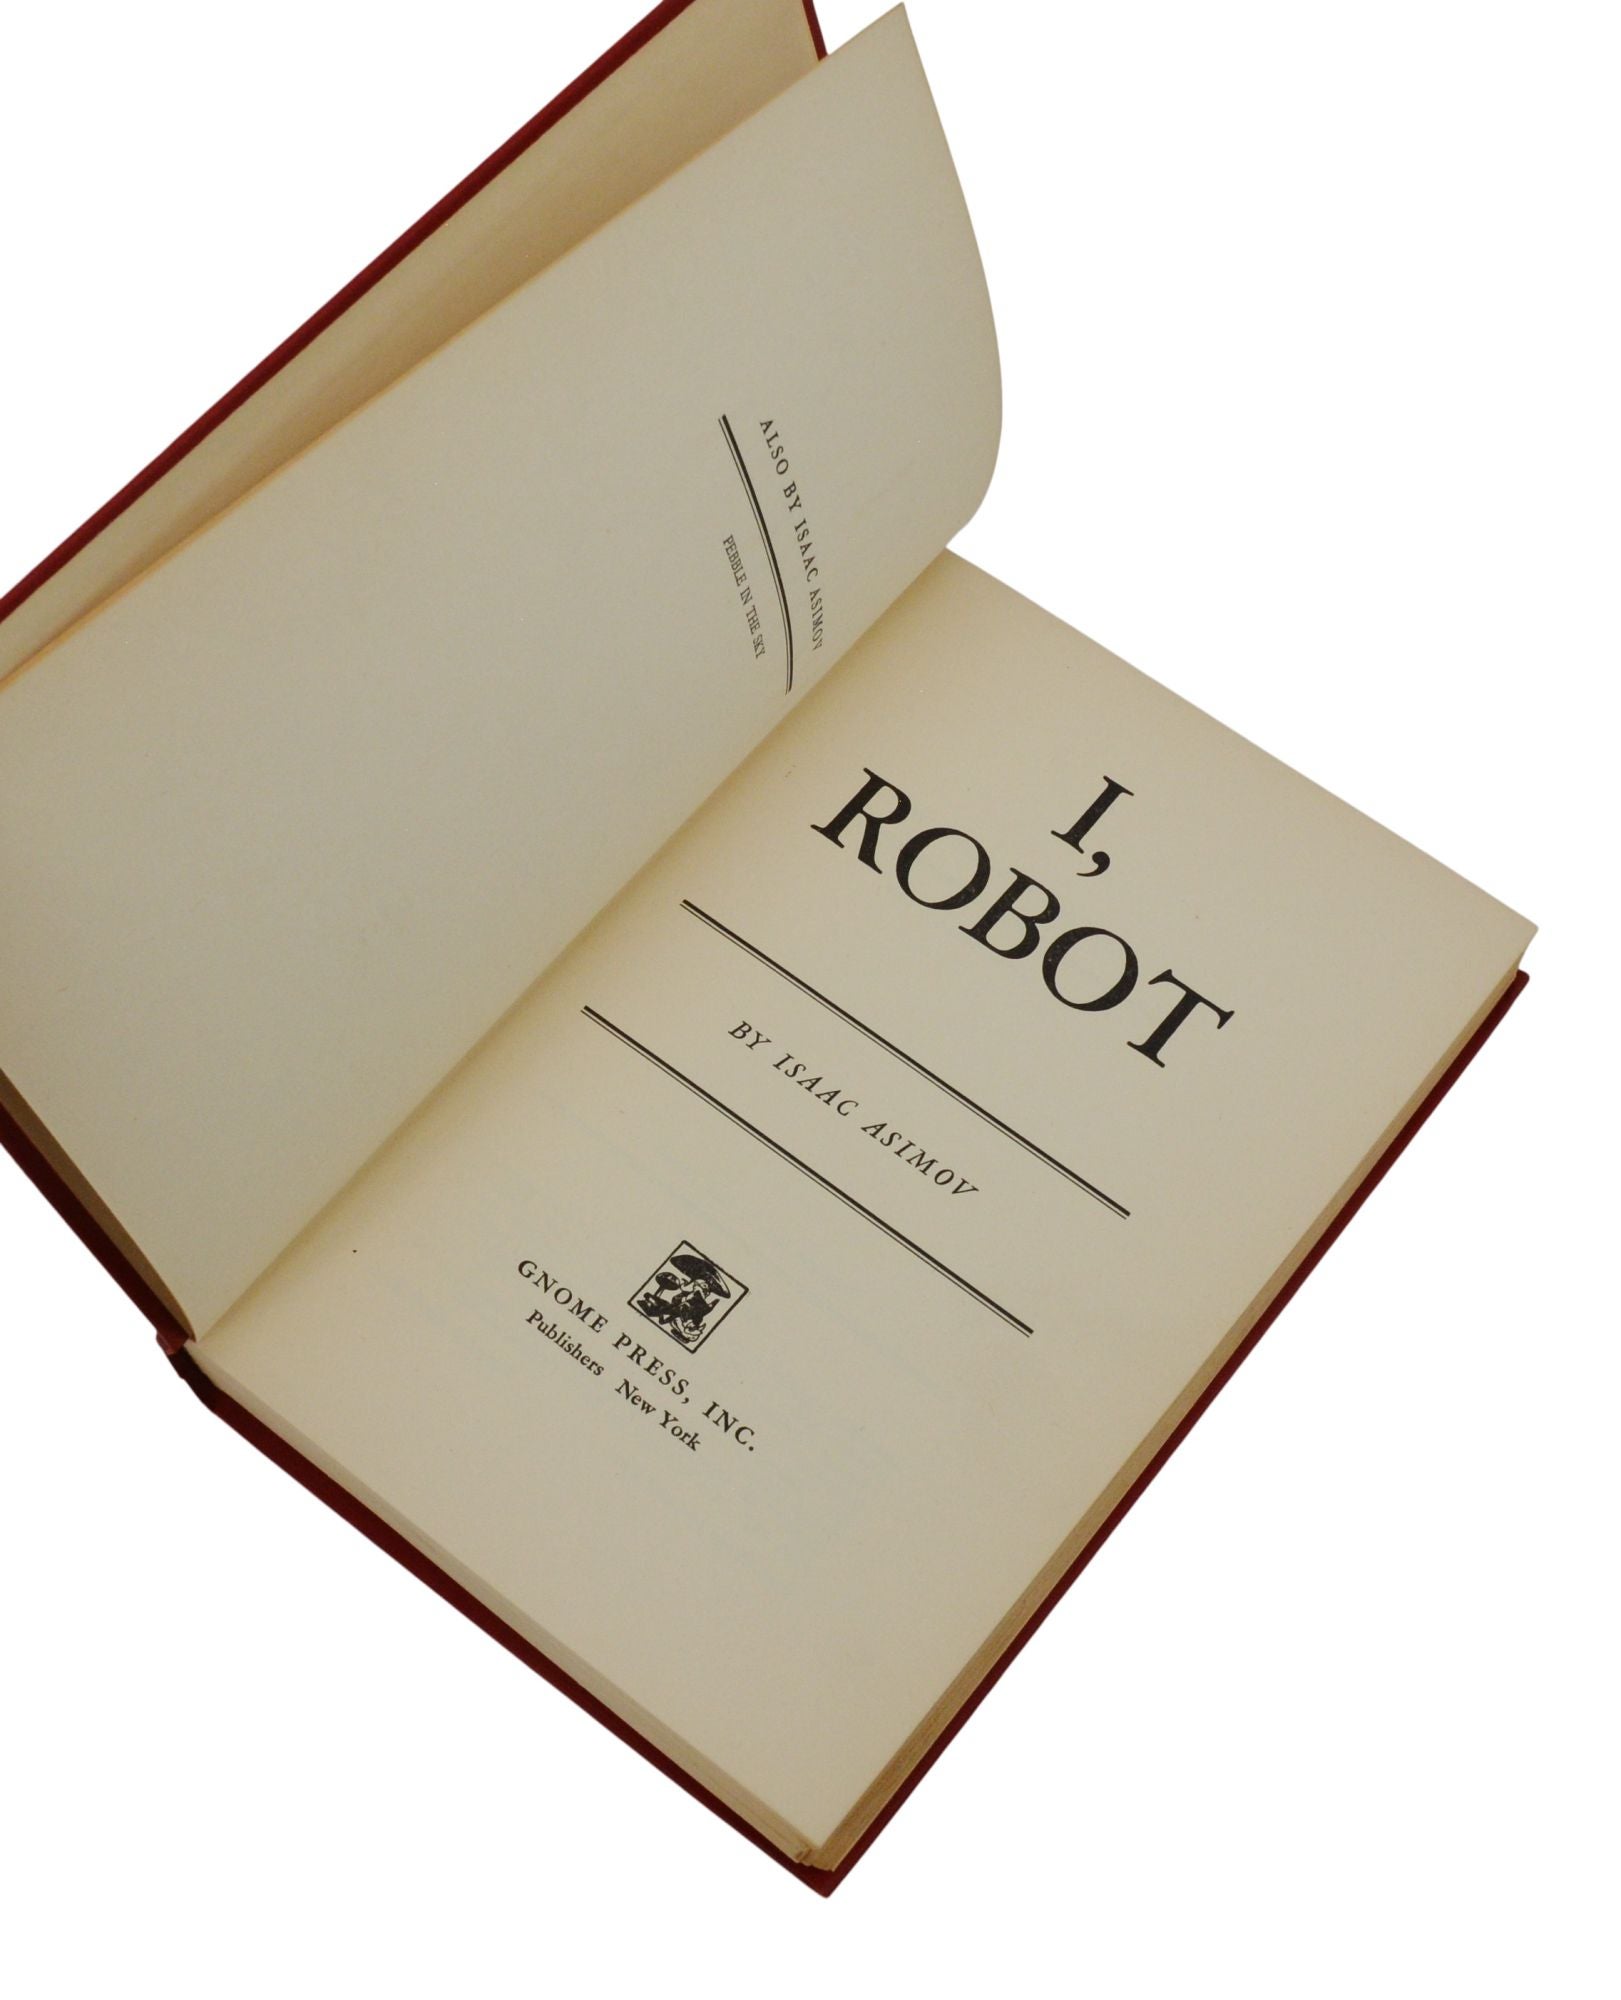 I, ROBOT by ISAAC ASIMOV - First edition - 1952 - from BUCKINGHAM BOOKS  (SKU: 49866)